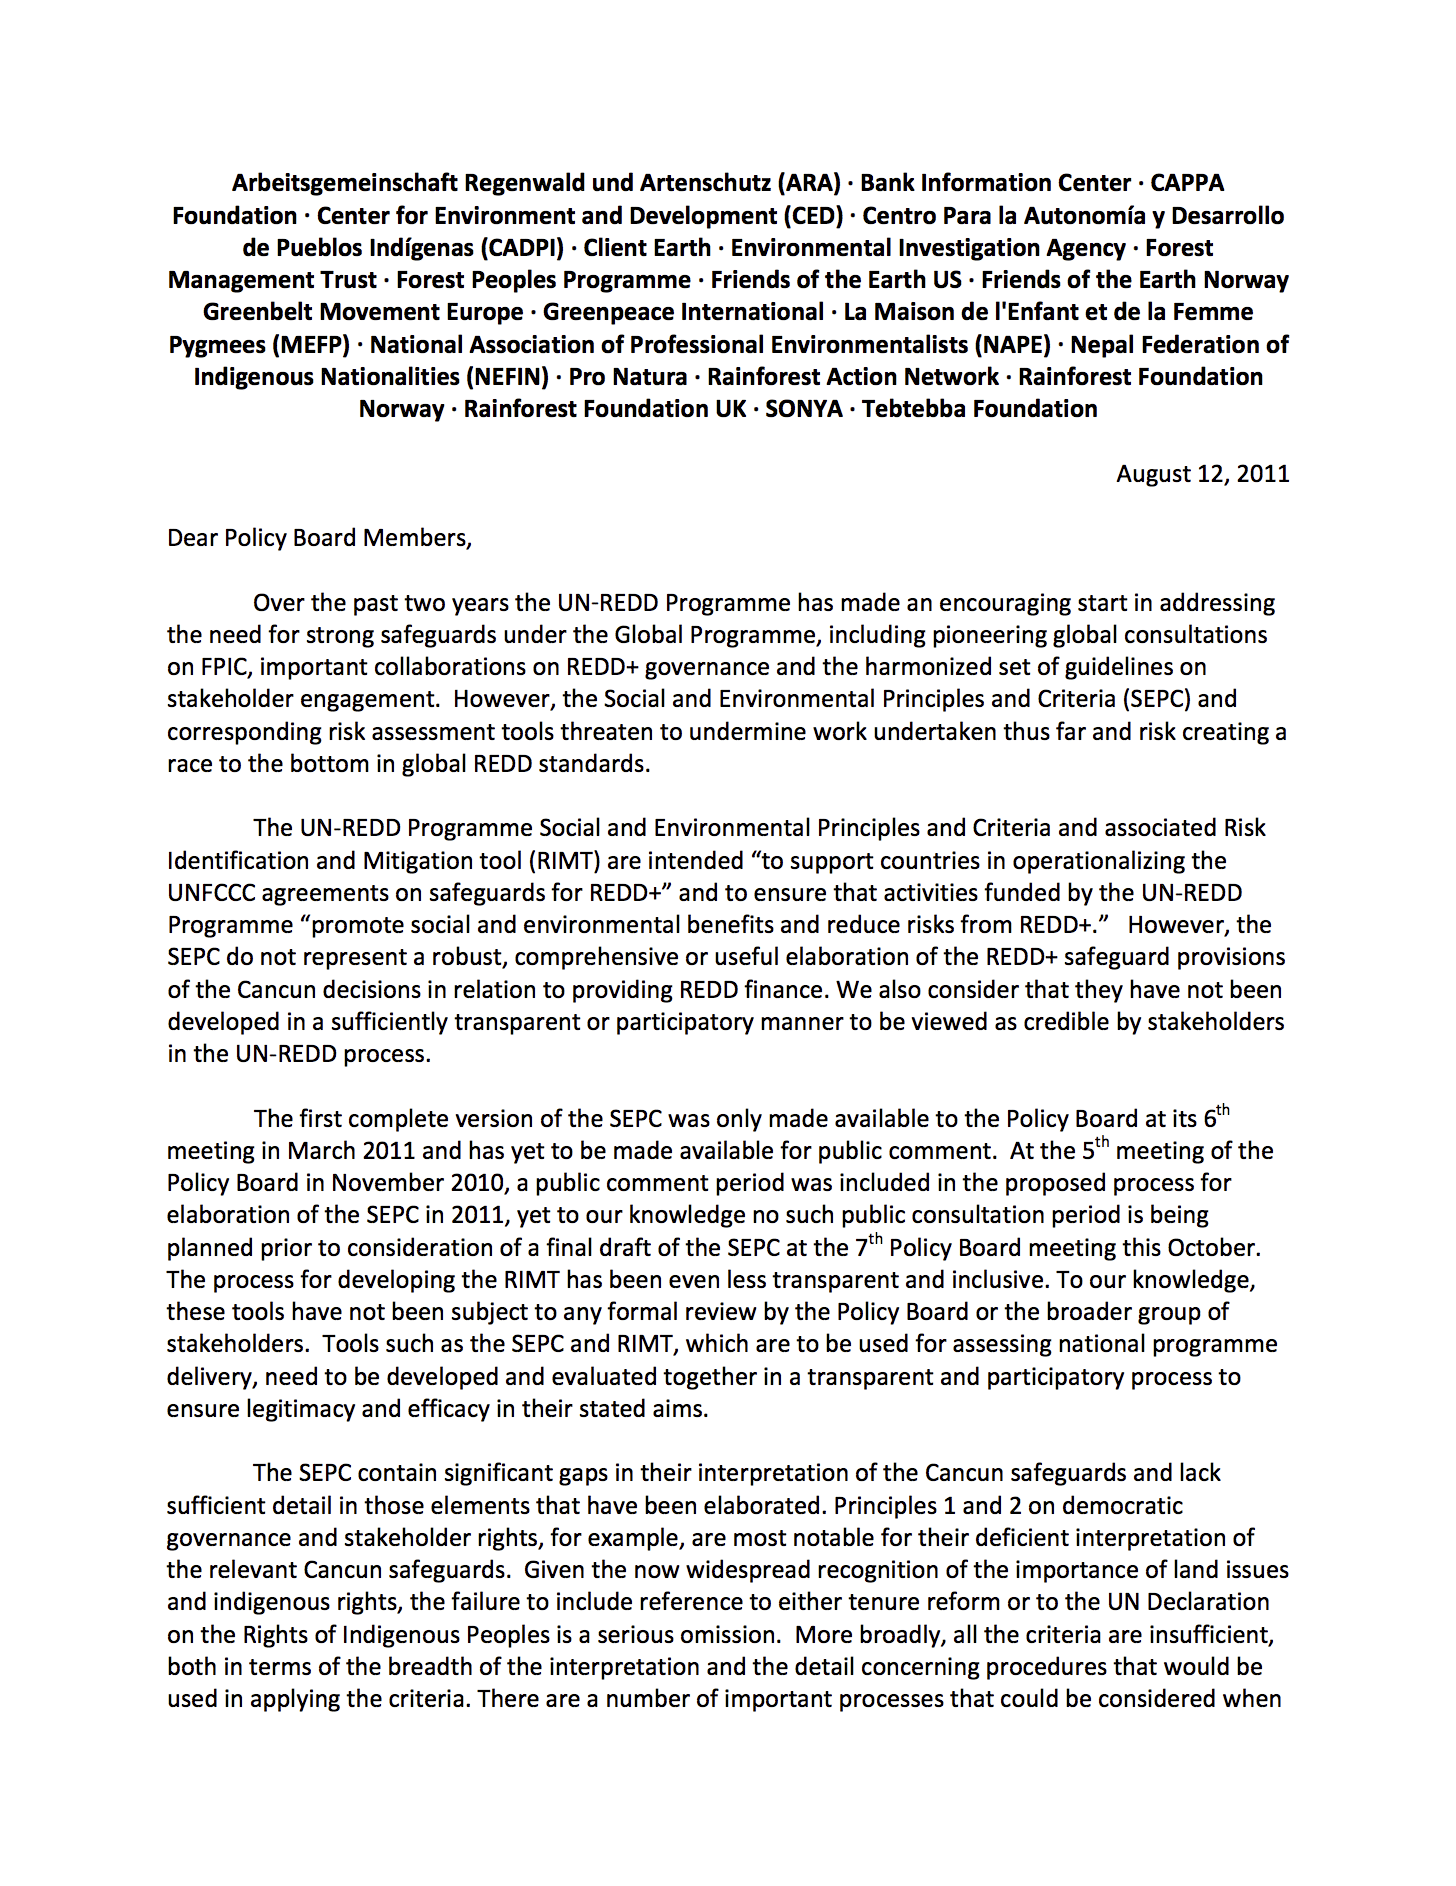 Letter to Policy Board Members